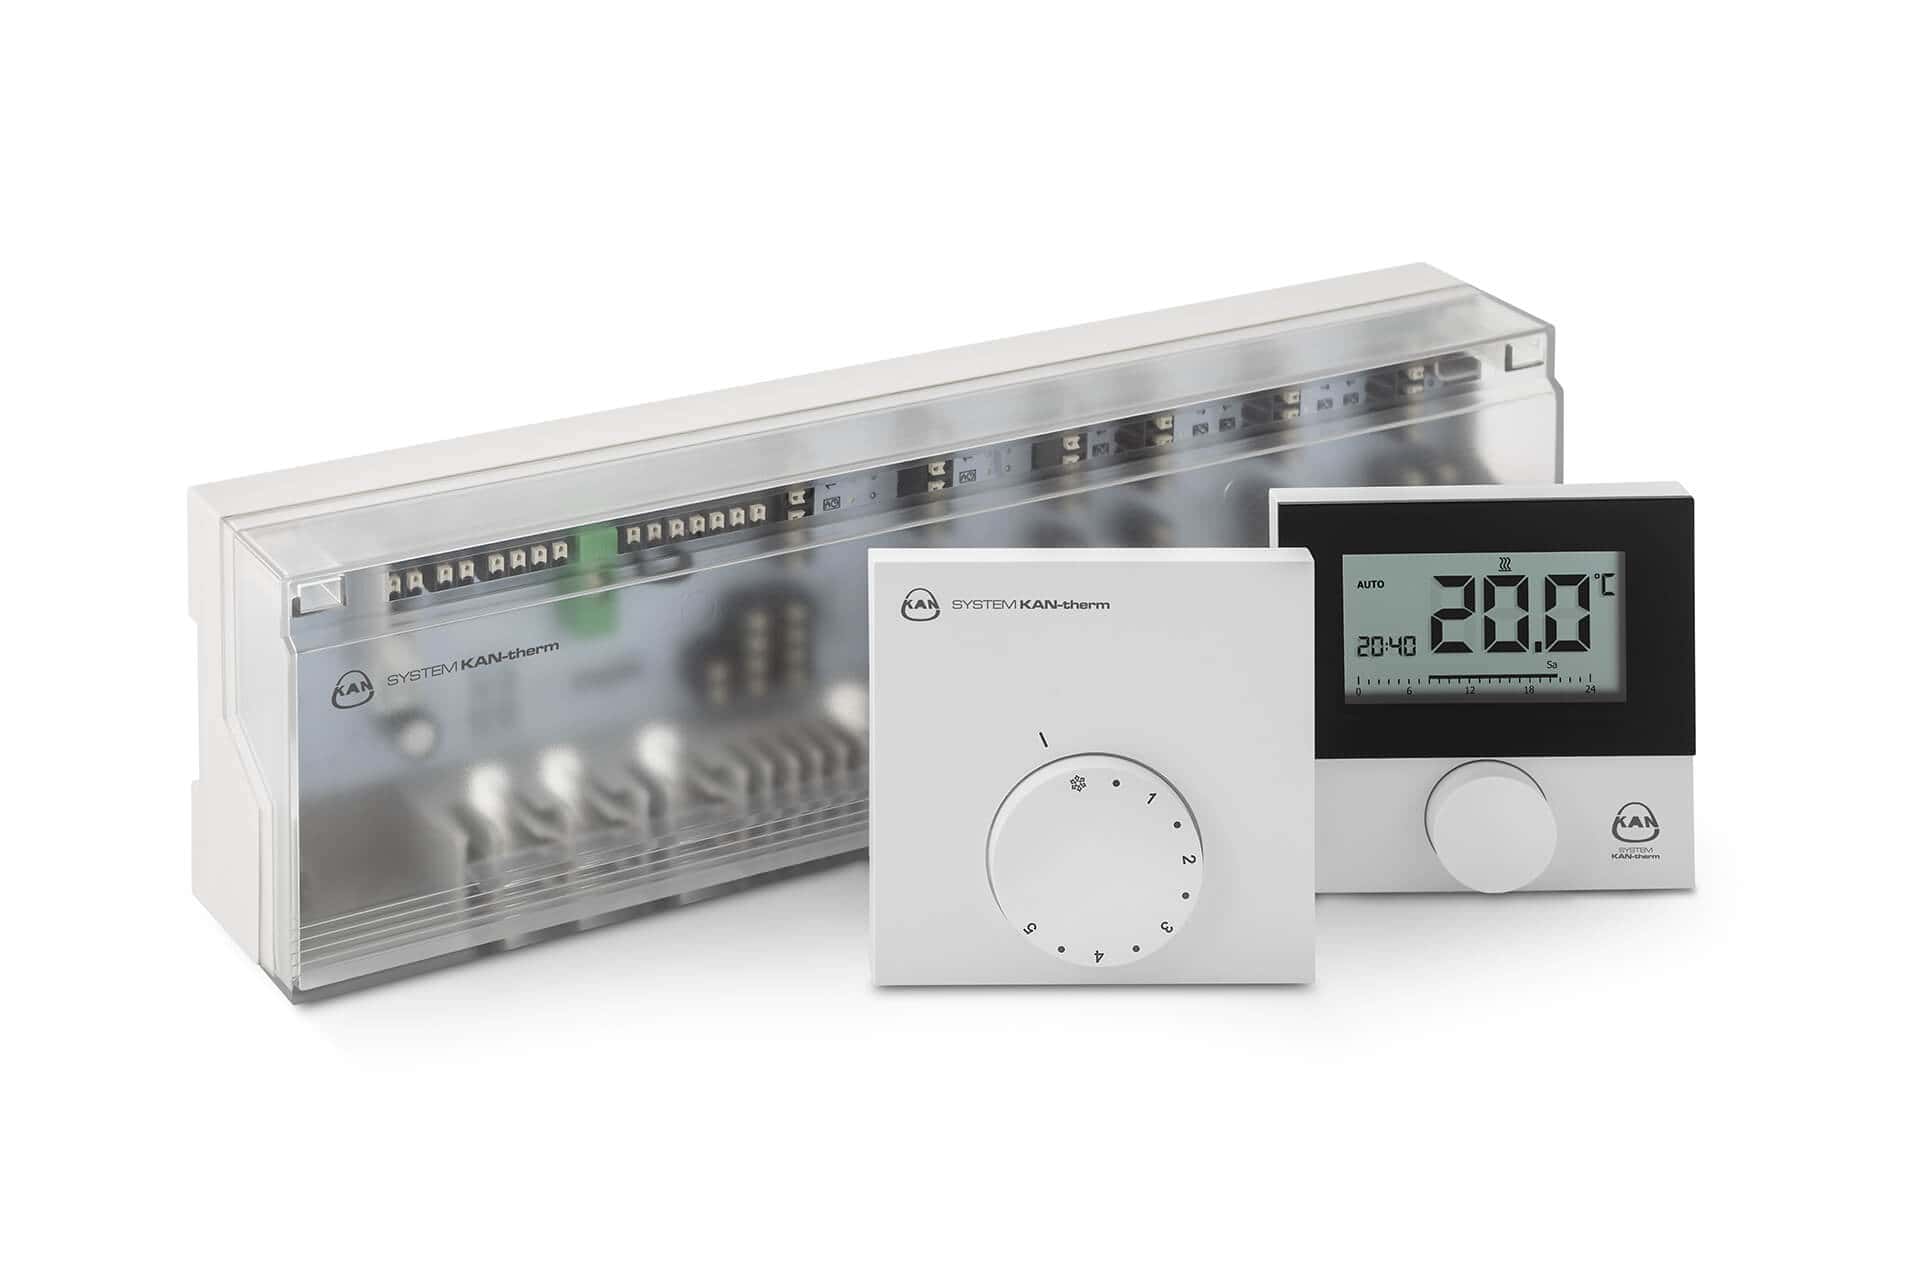 KAN-therm - Automation Smart & Basic+ - Online control capability